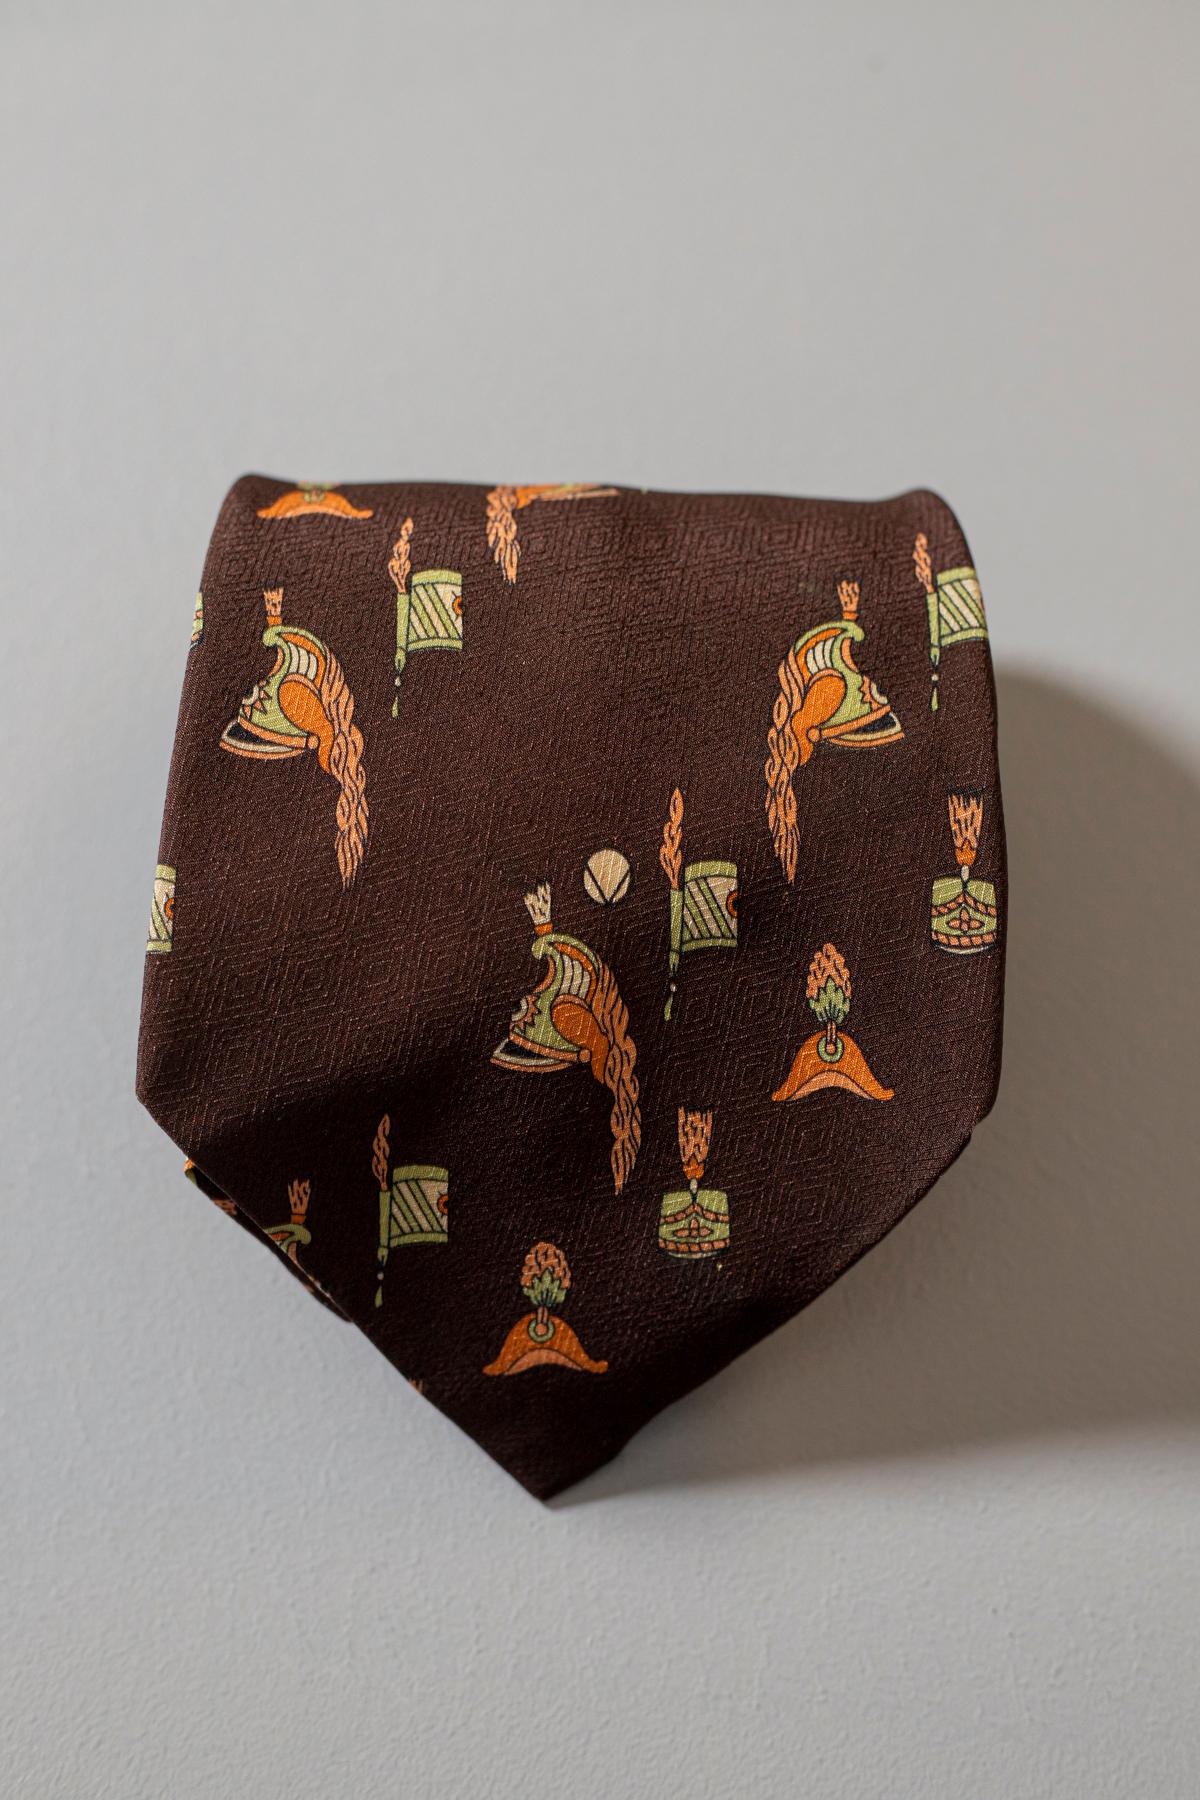 Vintage Valentino tie, It is made of 100% silk, which is the reason why it is smooth and of good quality. this model of tie, with the drawn helmets, will make your style unique and original. Ideal for an informal evening with friends or work